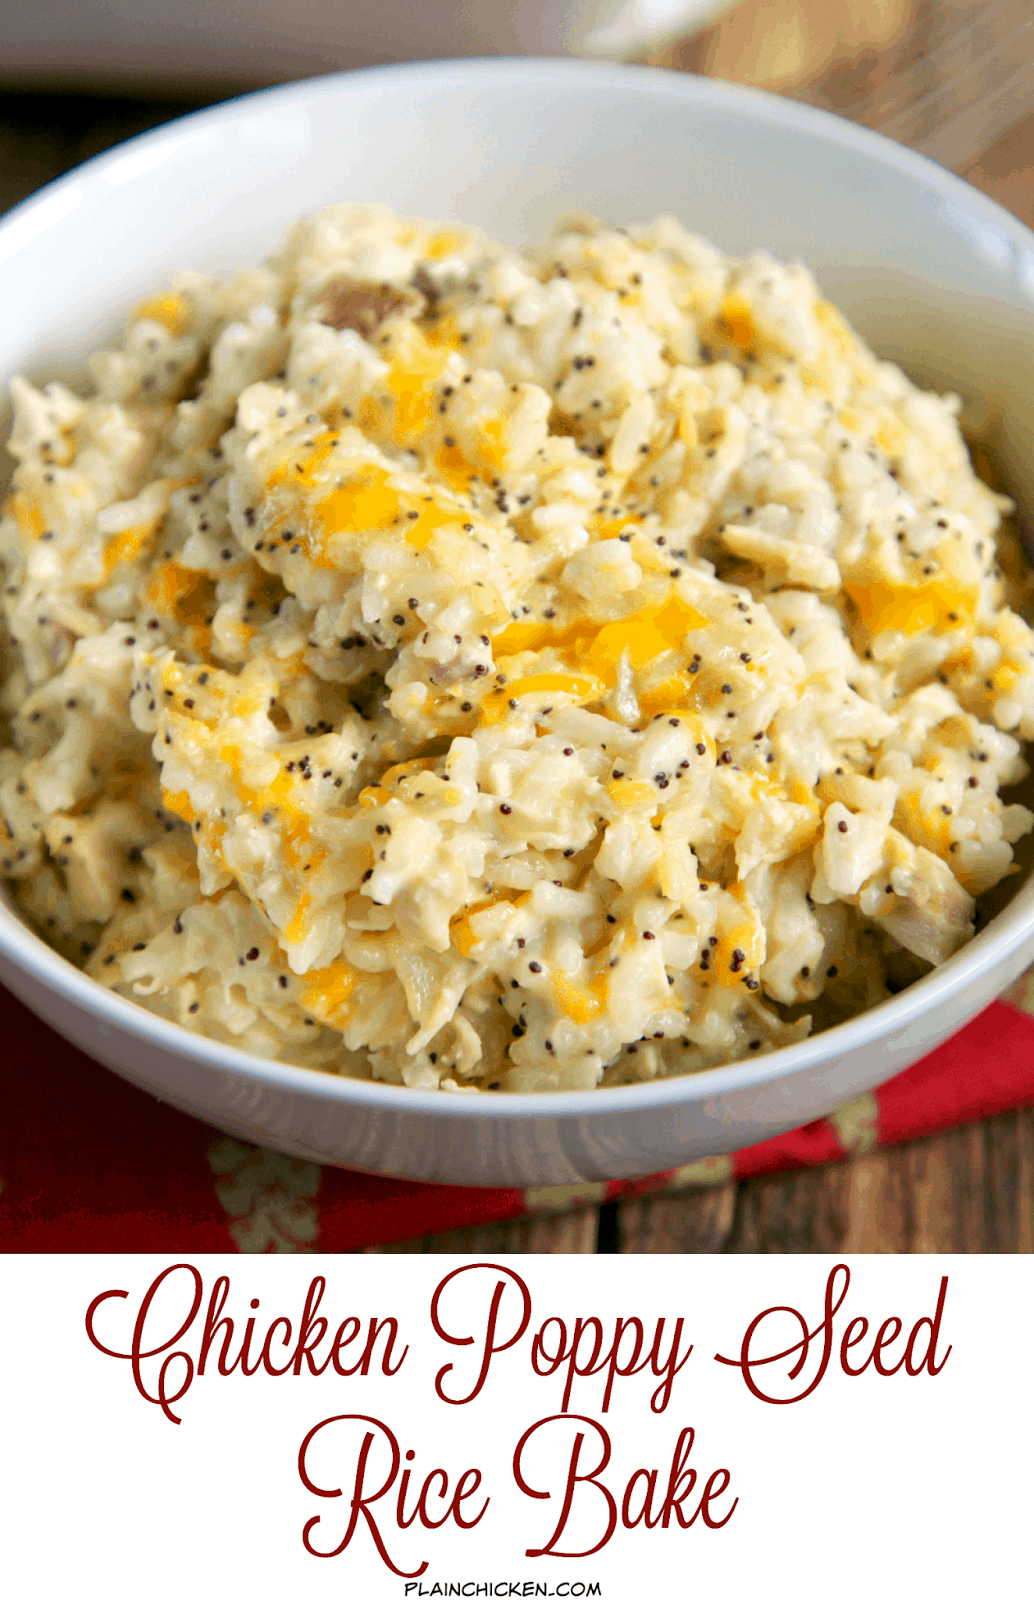 Chicken Poppy Seed Rice Bake - chicken, cheddar, sour cream, chicken soup, poppy seeds and rice - quick and easy weeknight casserole! Use rotisserie chicken and this comes together in 5 minutes! SO good! On the table in under 30 minutes! We make this at least once a week!!